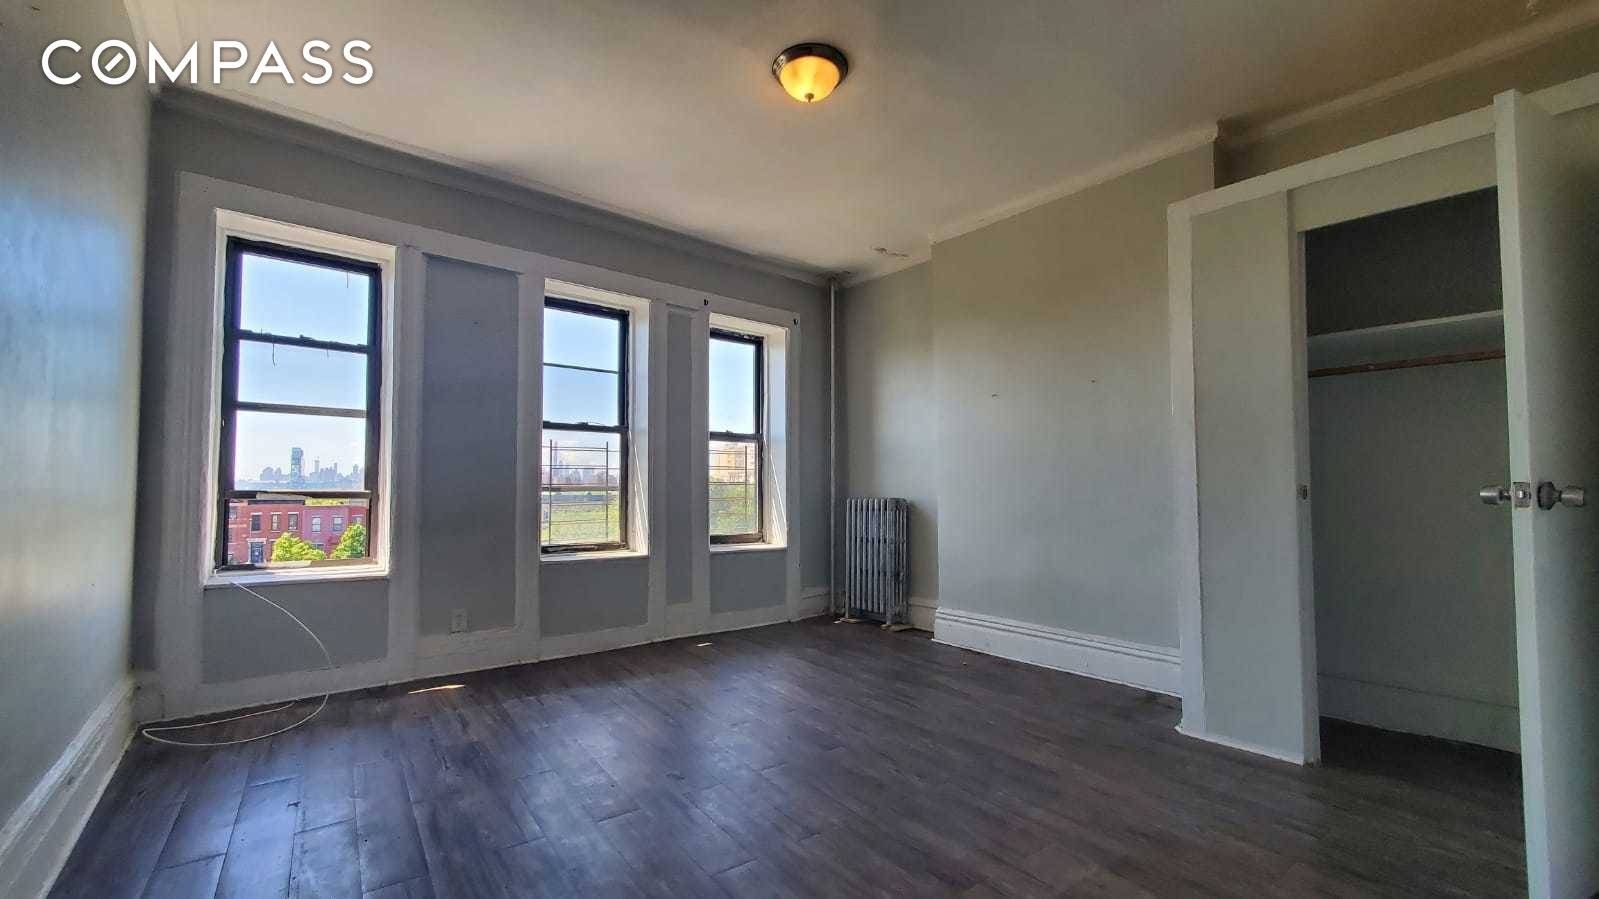 Incredible 4 Bedroom HUGE Apartment with Washer Dryer.